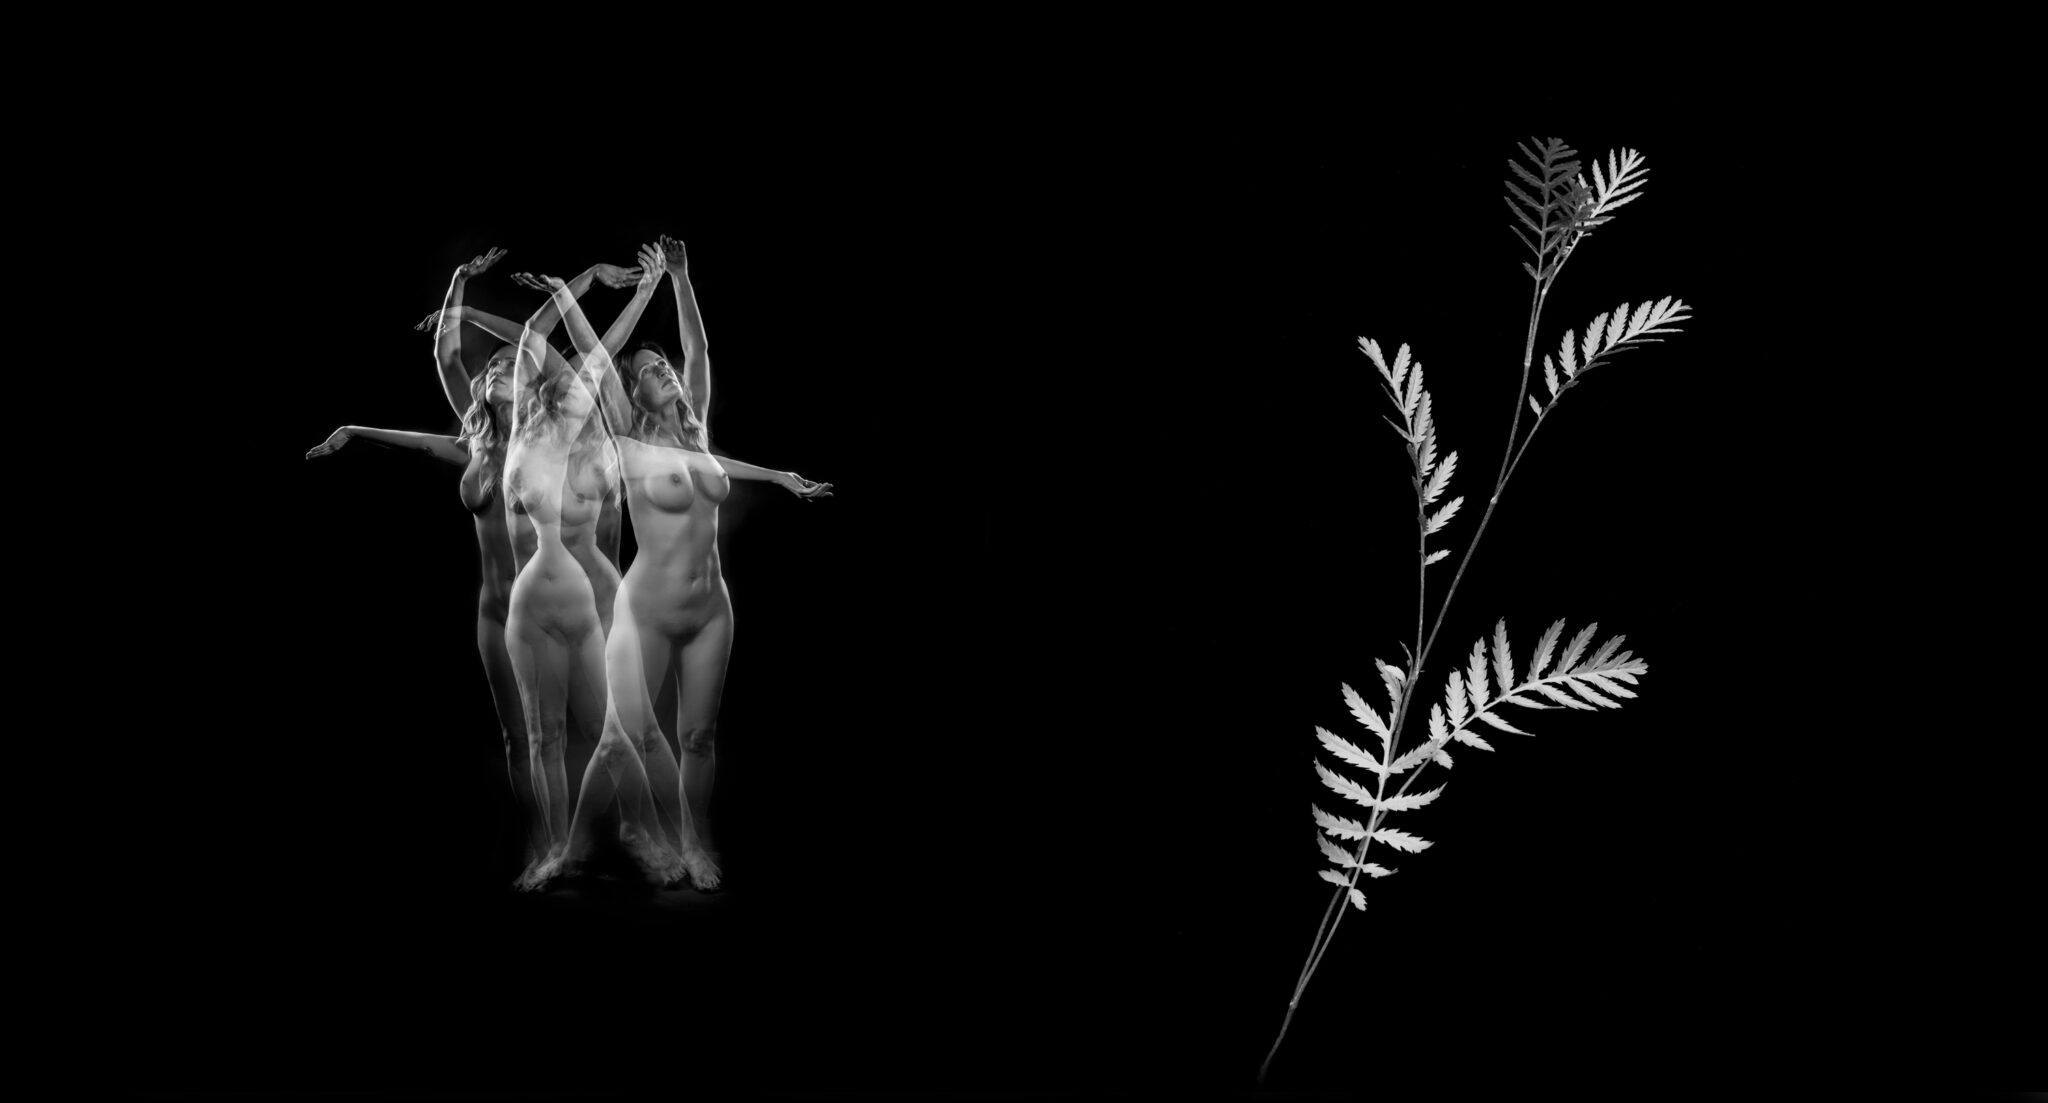 Black and white photograph of a nude woman dancing with joy alongside a botanical plant that has a similar shape and form.